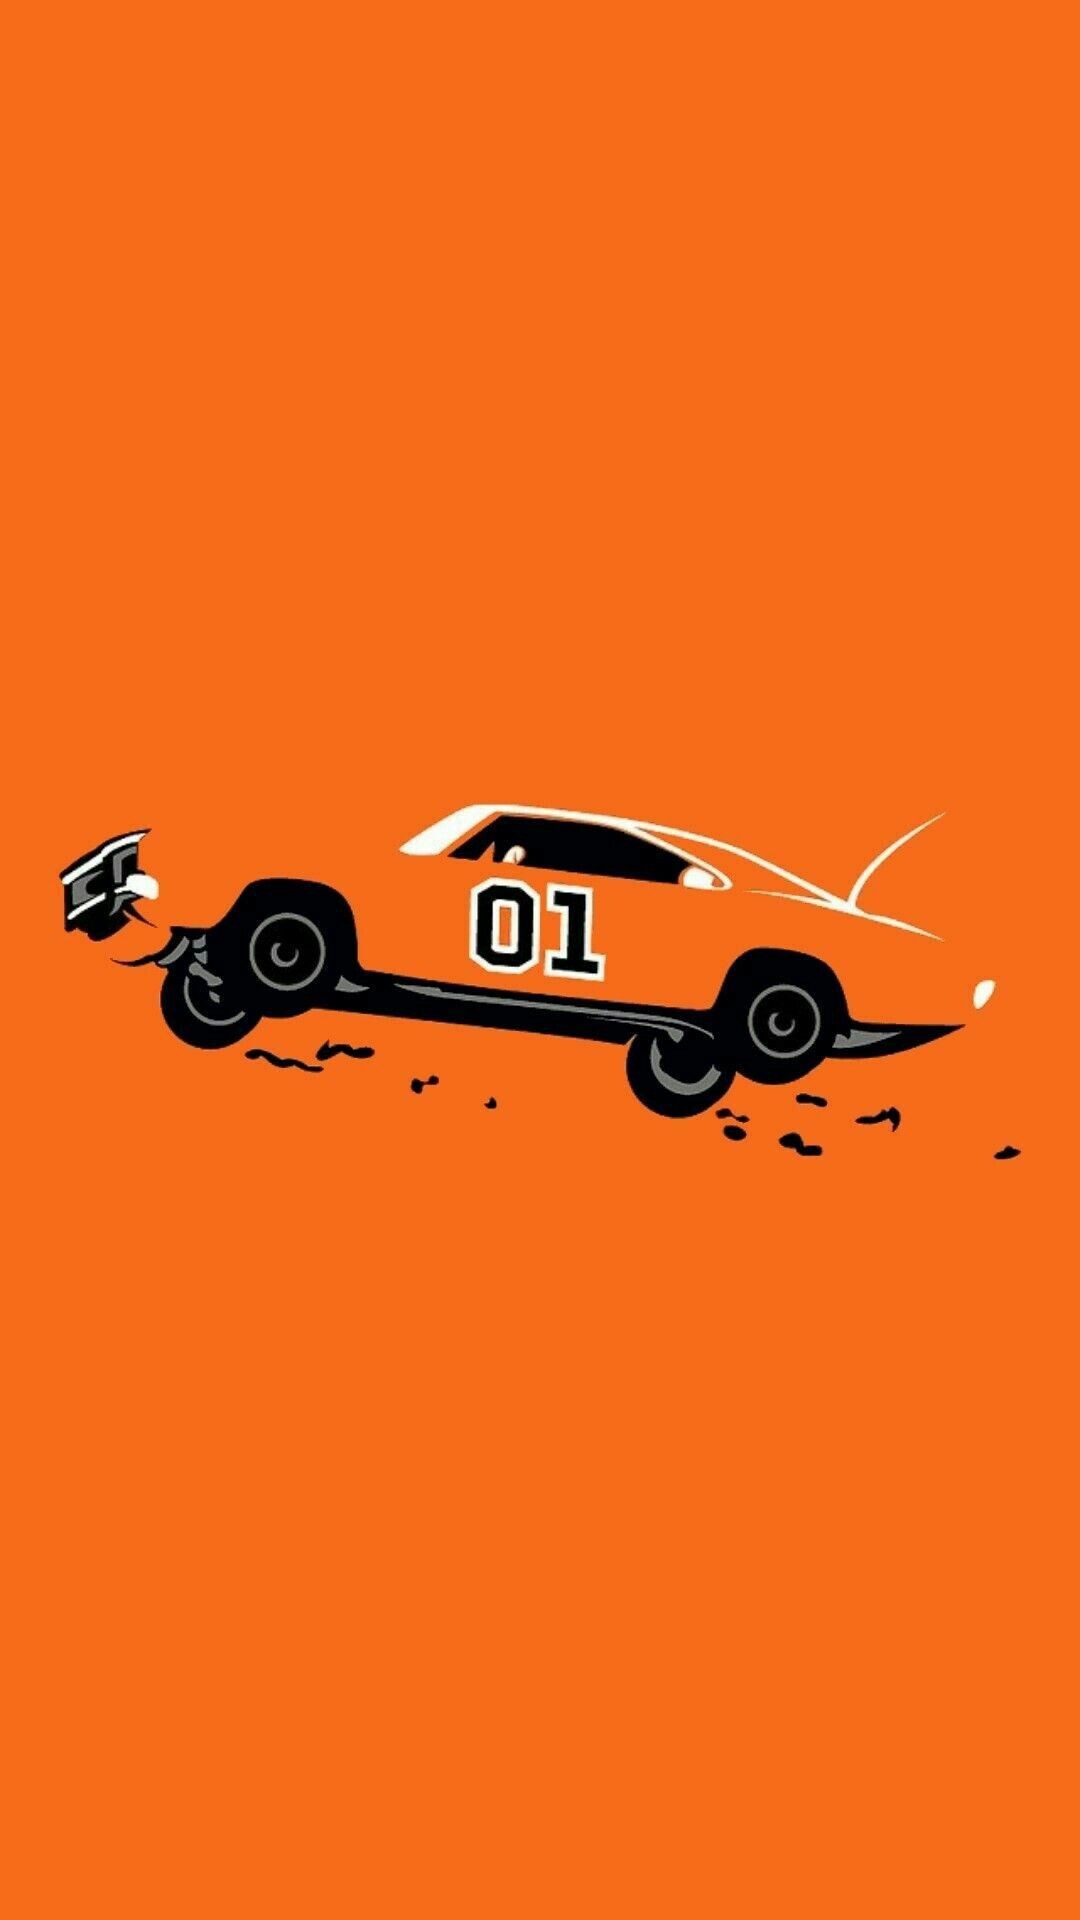 General Lee Car: Performing stunts, Jumps over the squad car, The show's premiere episode, Iconic Dodge car. 1080x1920 Full HD Wallpaper.